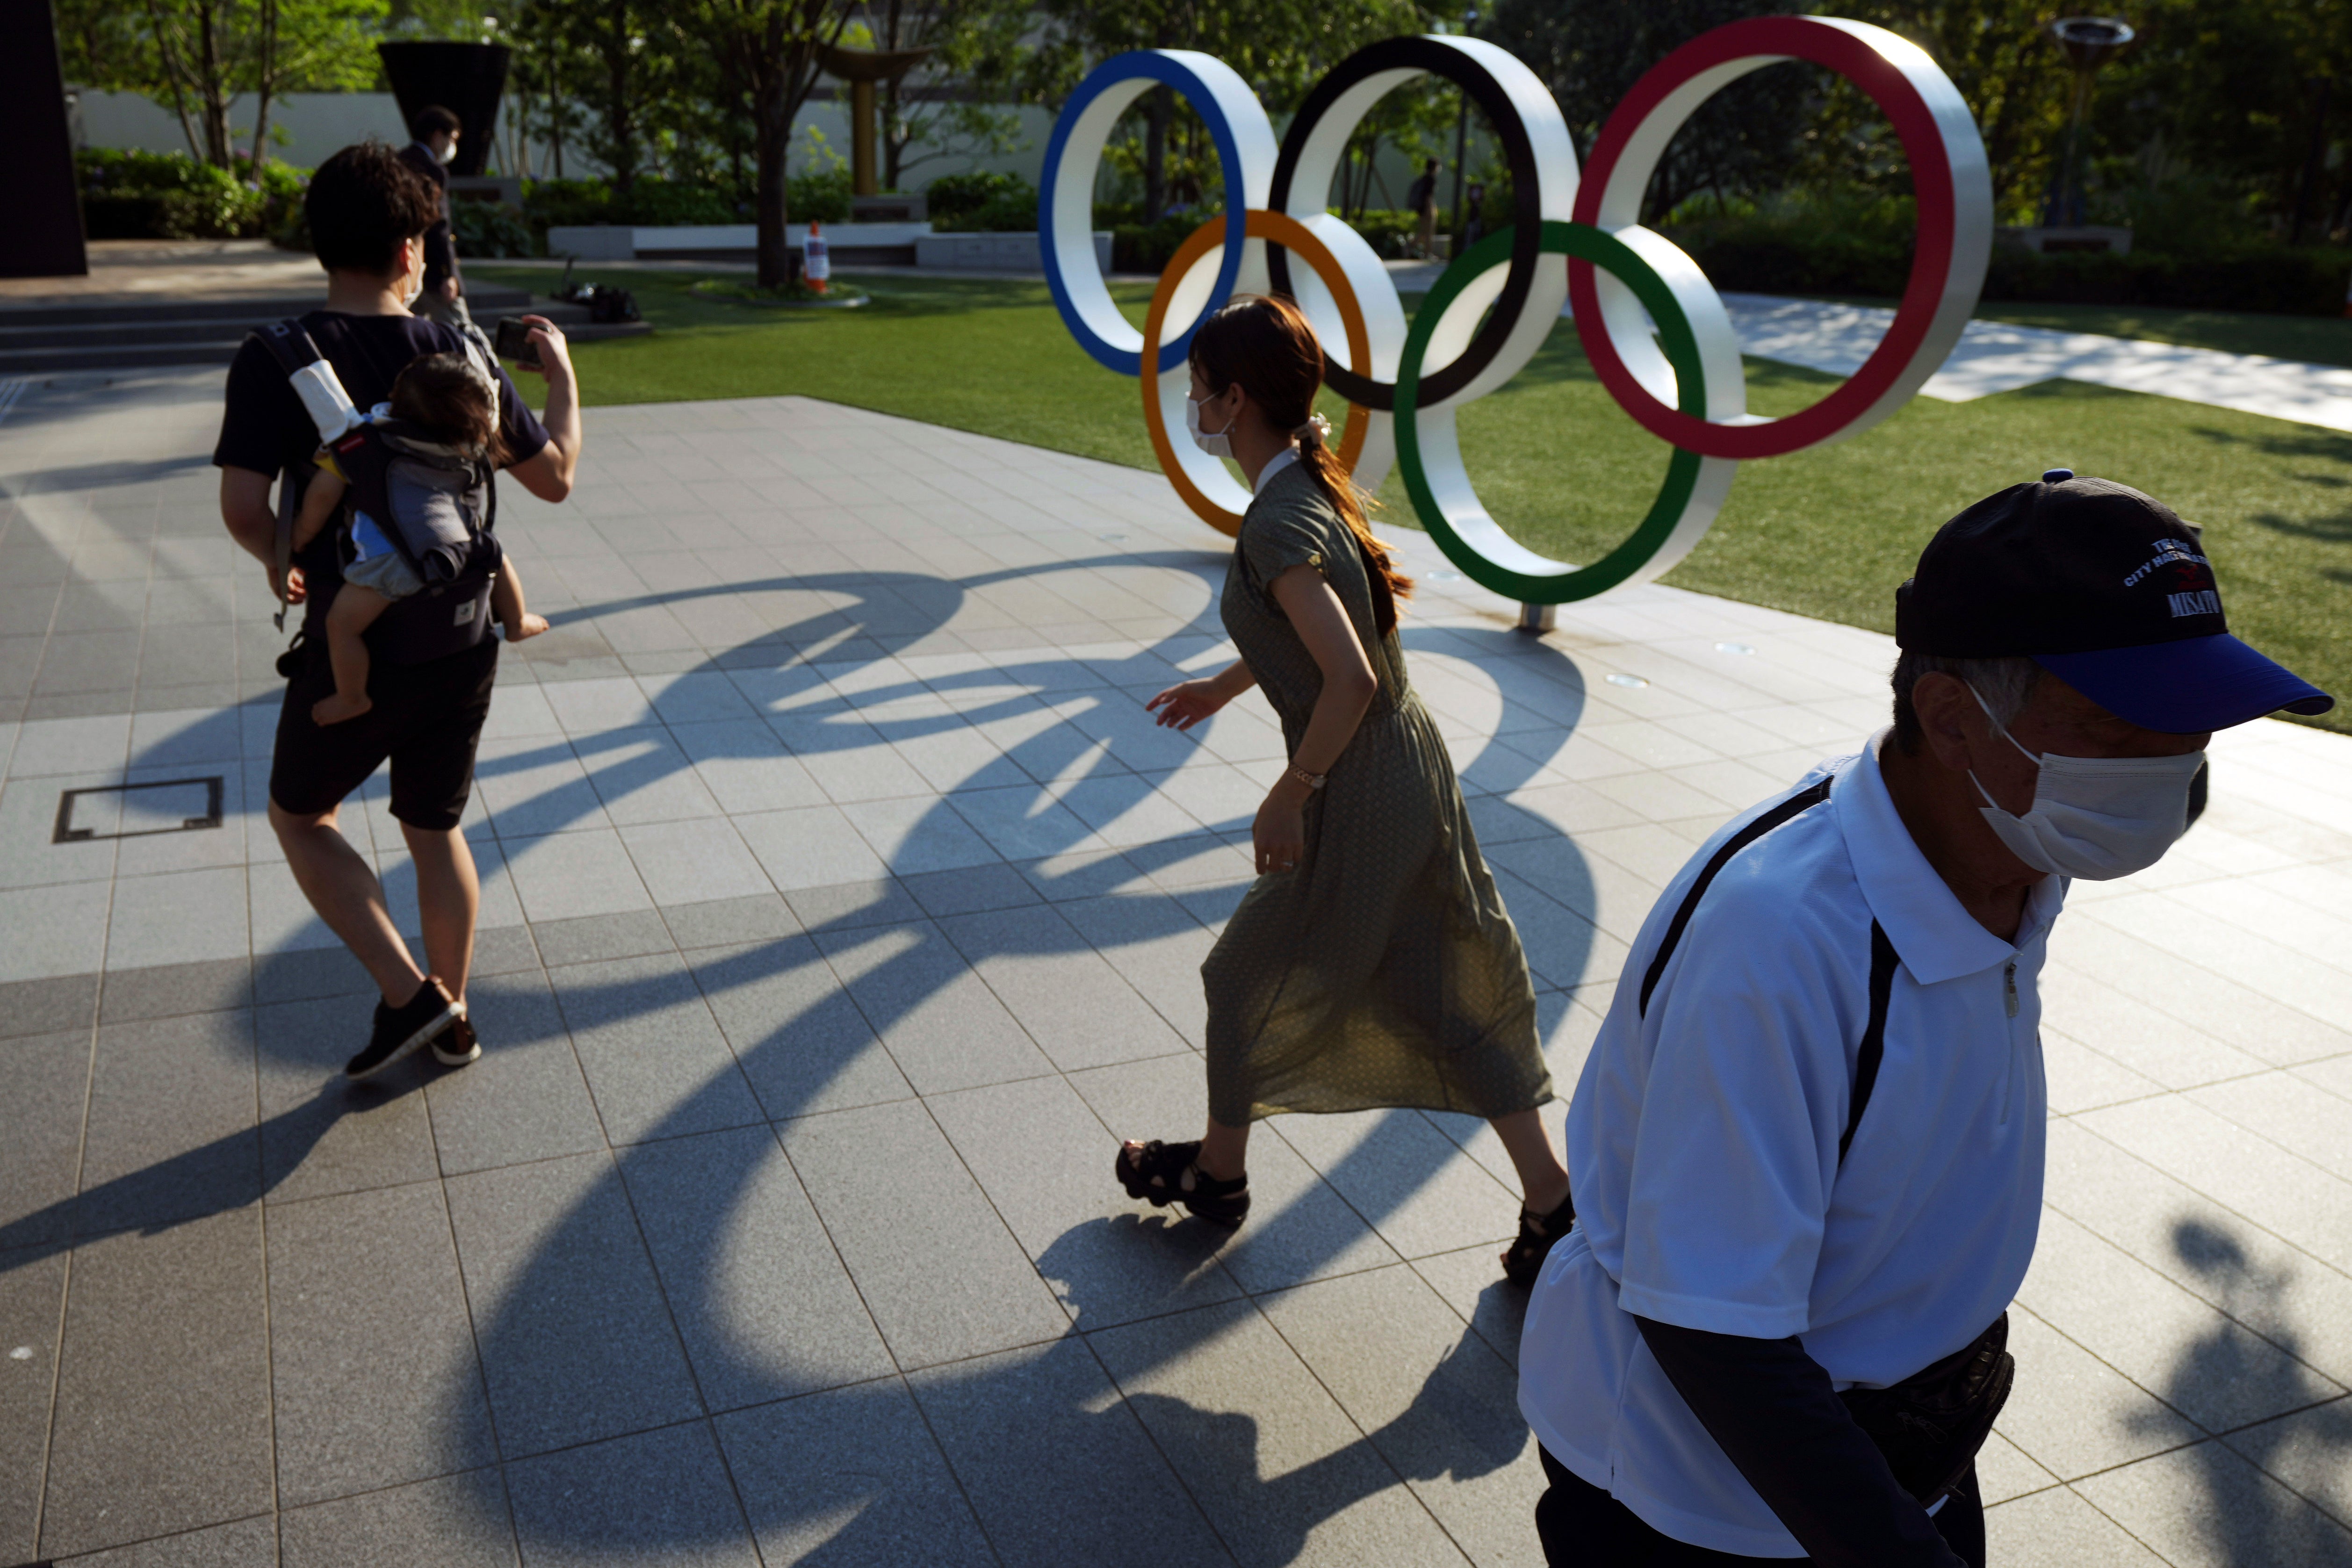 People walking past the Olympic rings in Tokyo. The Japanese public has generally been opposed to the Games, partly over fears that coronavirus levels will spike as about 100,000 people enter the country